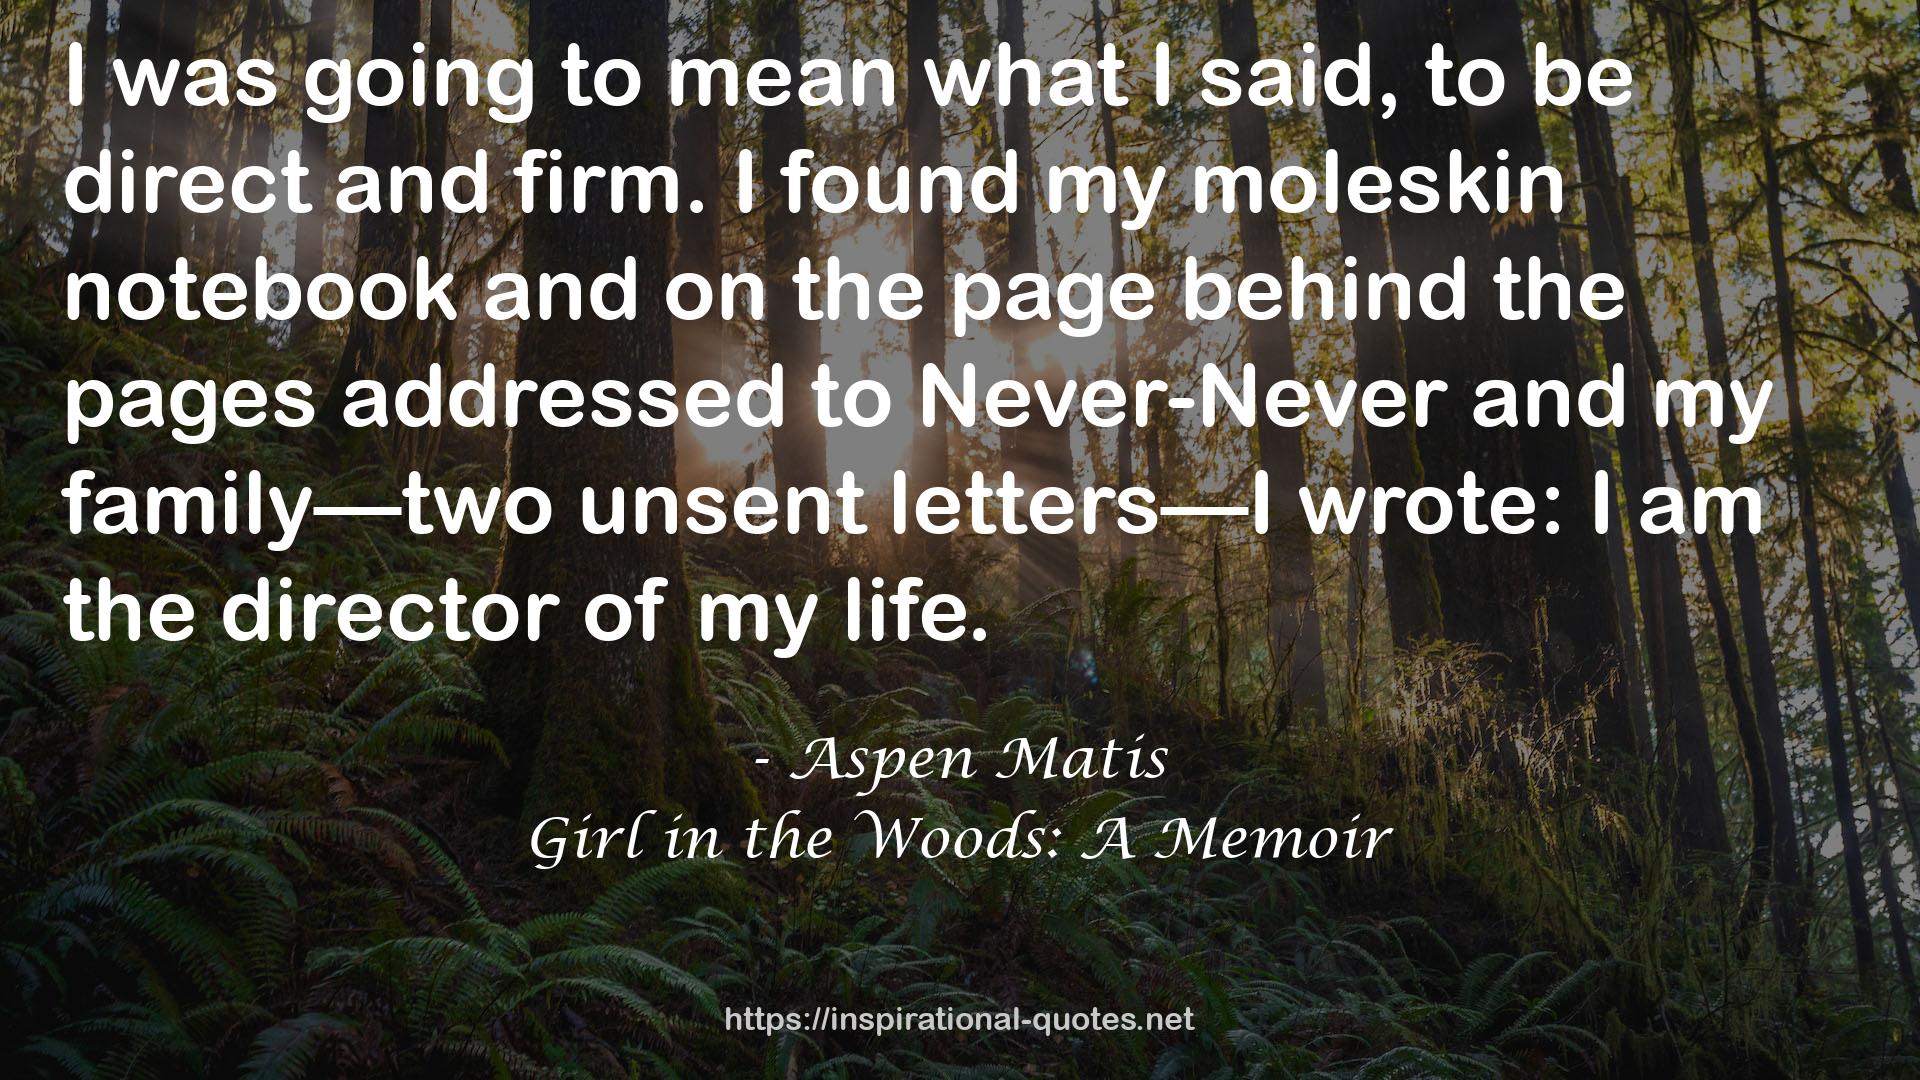 Girl in the Woods: A Memoir QUOTES